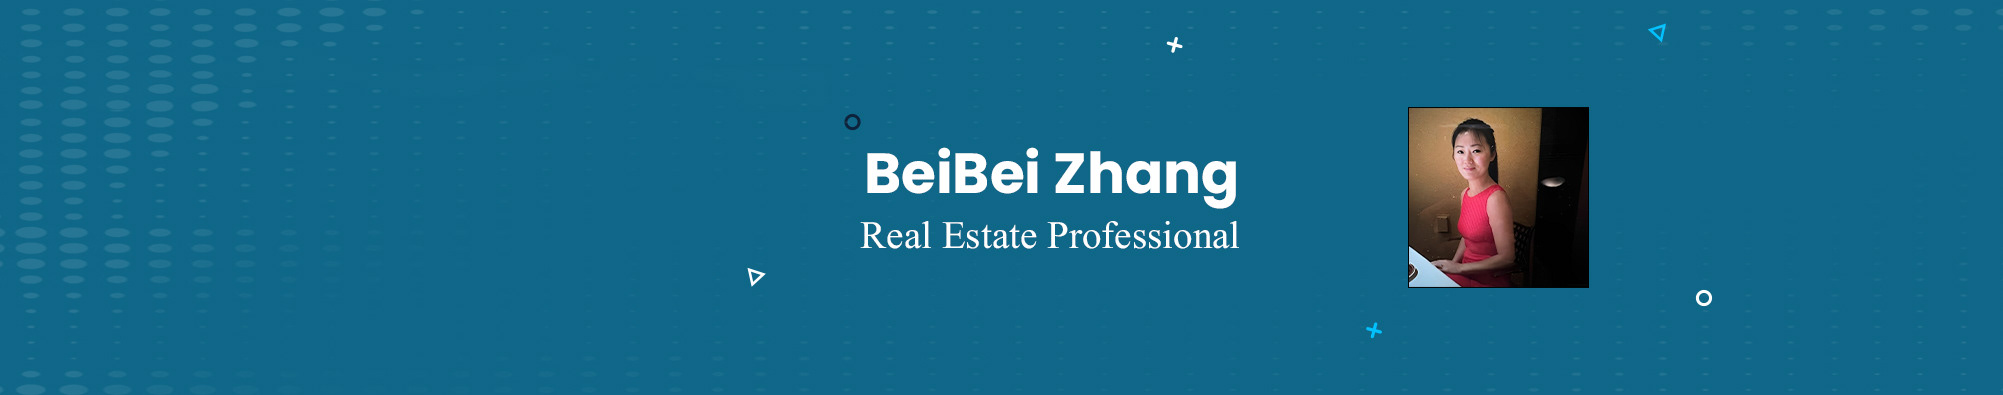 BeiBei Zhang's profile banner